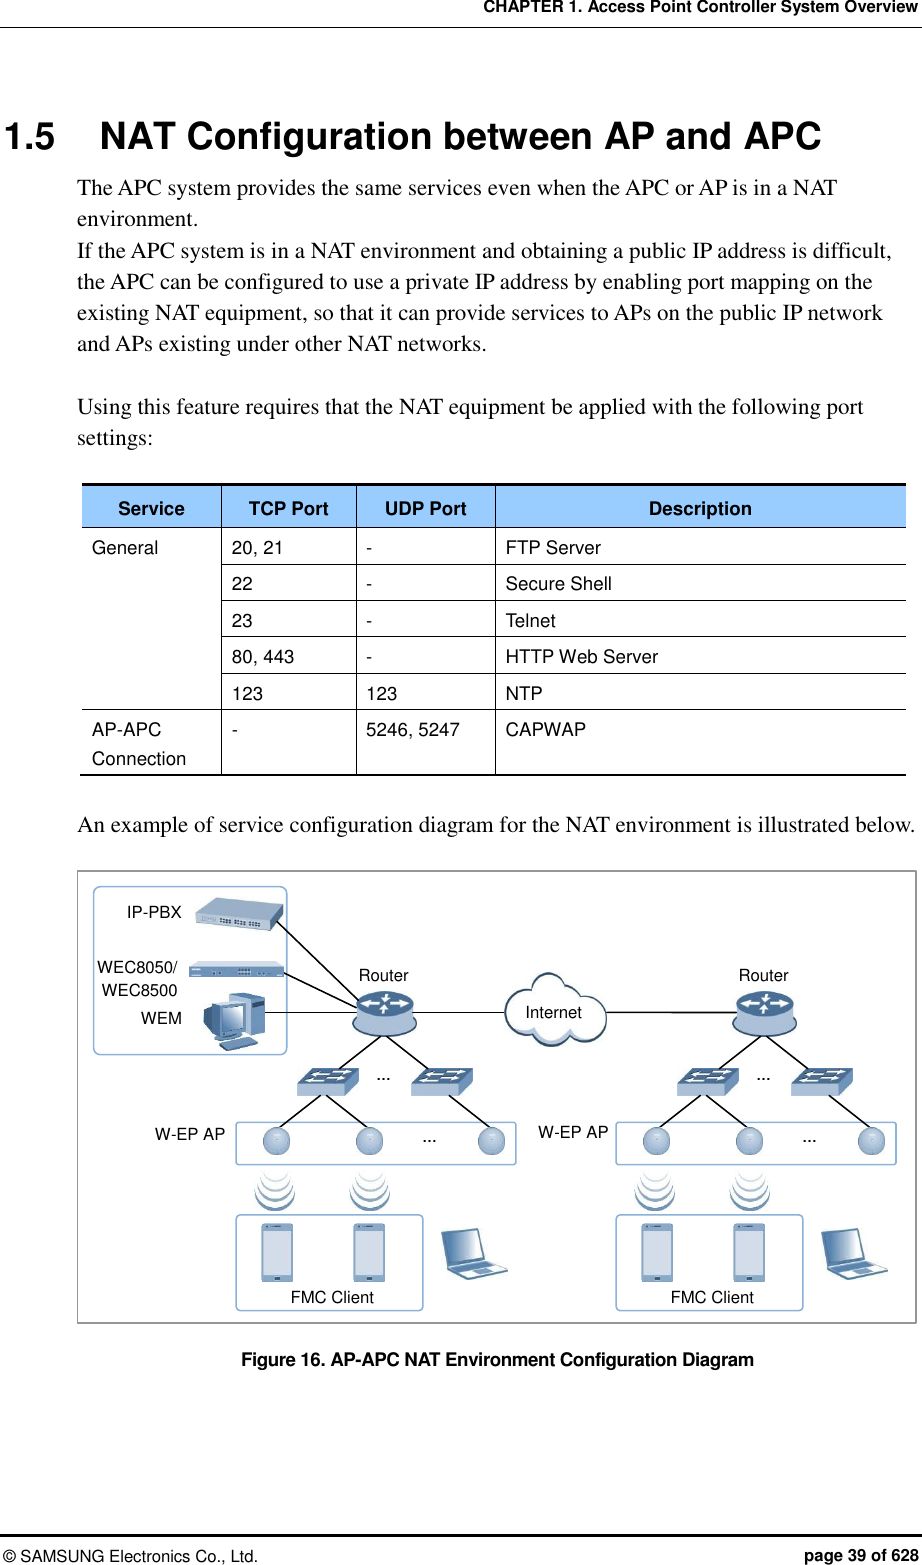 CHAPTER 1. Access Point Controller System Overview ©  SAMSUNG Electronics Co., Ltd.  page 39 of 628 1.5  NAT Configuration between AP and APC The APC system provides the same services even when the APC or AP is in a NAT environment. If the APC system is in a NAT environment and obtaining a public IP address is difficult, the APC can be configured to use a private IP address by enabling port mapping on the existing NAT equipment, so that it can provide services to APs on the public IP network and APs existing under other NAT networks.  Using this feature requires that the NAT equipment be applied with the following port settings:  Service TCP Port UDP Port Description General 20, 21 - FTP Server 22 - Secure Shell 23 - Telnet 80, 443 - HTTP Web Server 123 123 NTP AP-APC Connection - 5246, 5247 CAPWAP  An example of service configuration diagram for the NAT environment is illustrated below.  Figure 16. AP-APC NAT Environment Configuration Diagram  IP-PBX WEC8050/ WEC8500 WEM Router Internet … … FMC Client Router … … FMC Client W-EP AP W-EP AP 